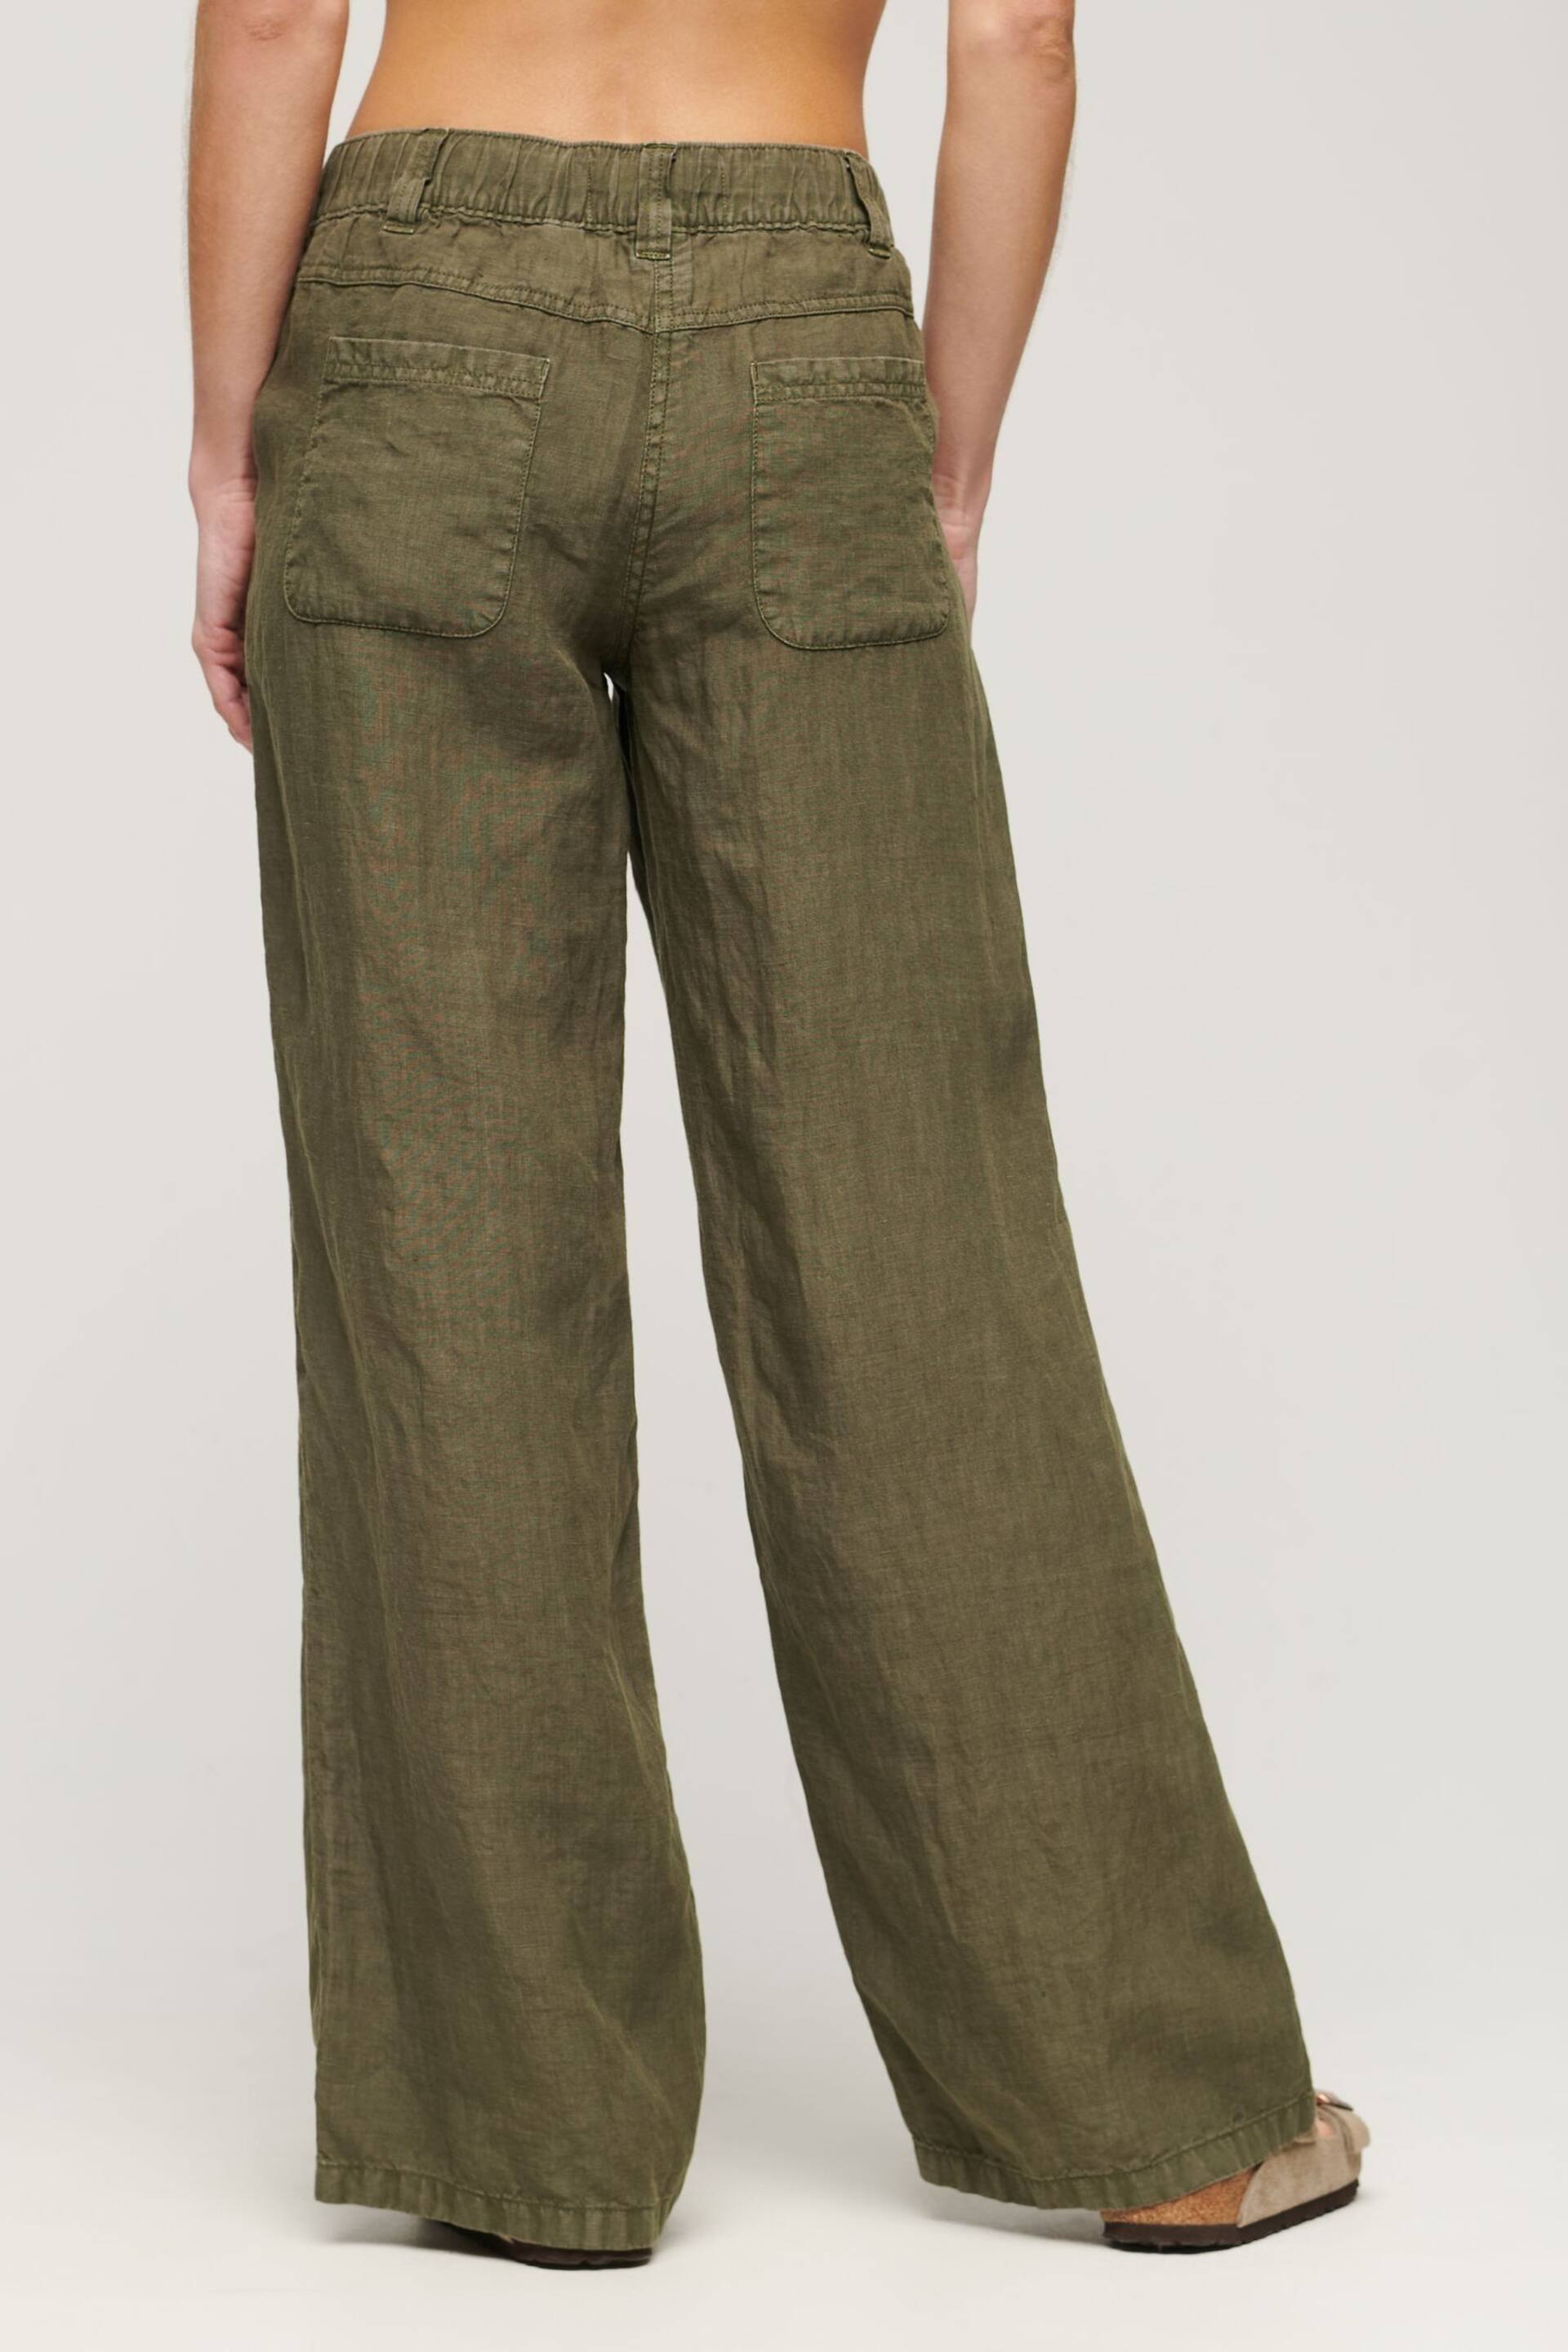 Superdry Green Linen Low Rise Trousers - Image 2 of 6